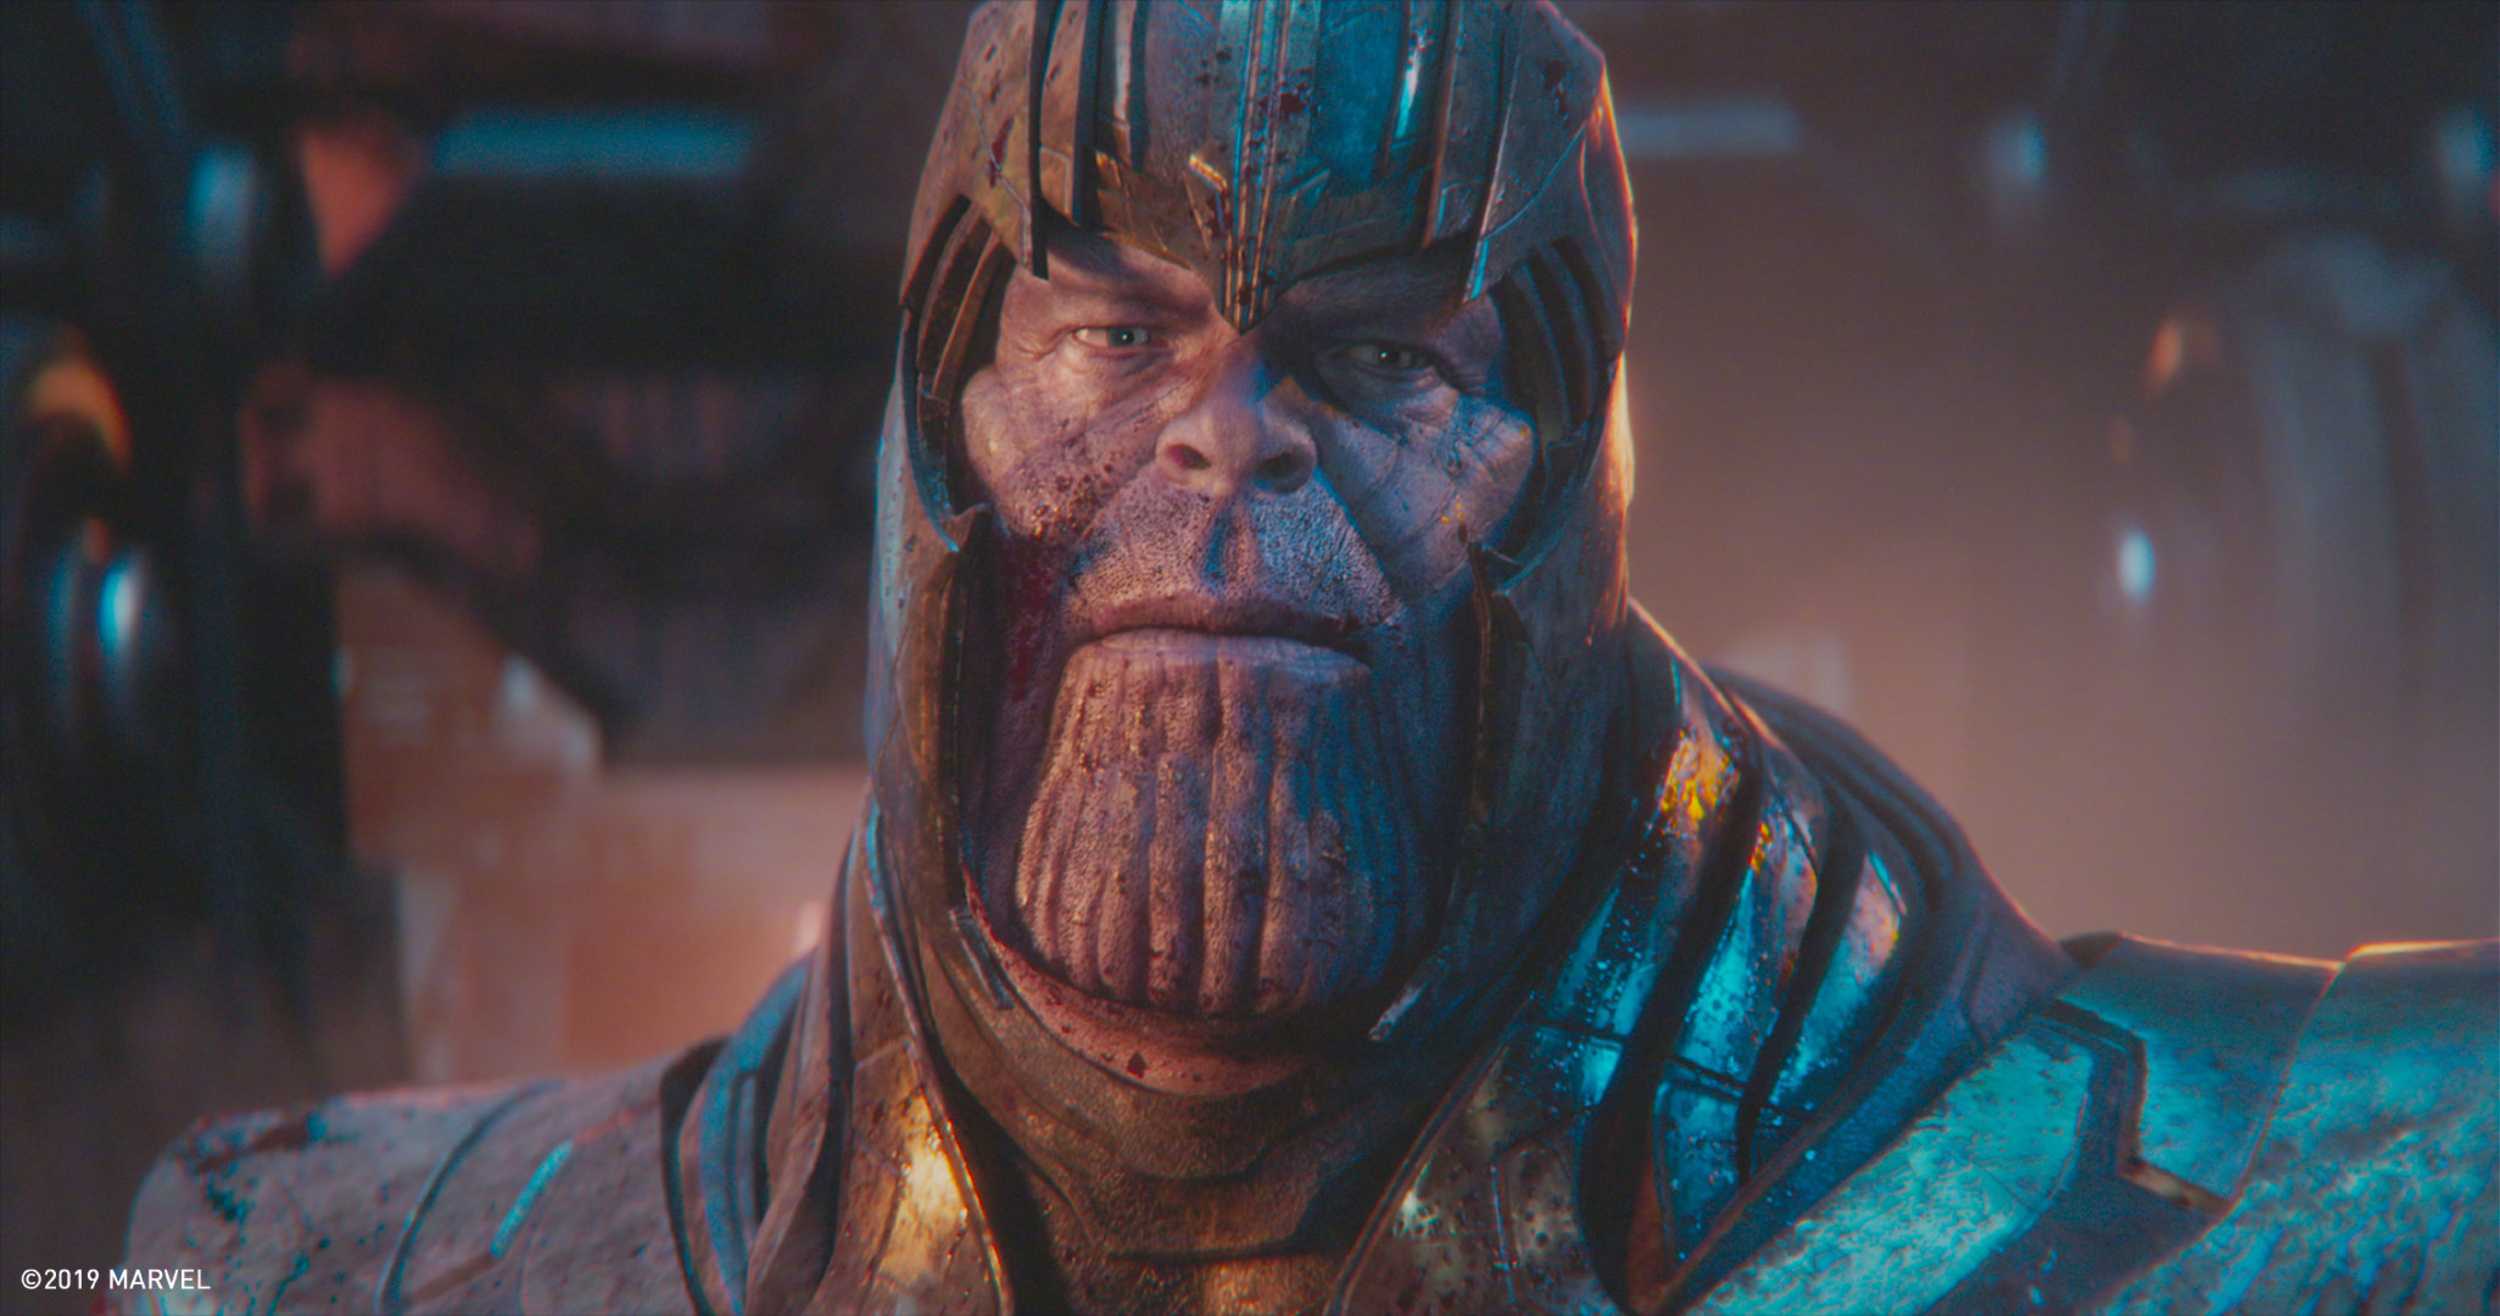 <p>Jim Starlin makes a cameo as a grieving man in <em>Endgame</em>, and it’s only fitting he got a chance to be in the film. After all, Starlin is a comic artist and writer who created the character of Thanos.</p><p><a href='https://www.msn.com/en-us/community/channel/vid-cj9pqbr0vn9in2b6ddcd8sfgpfq6x6utp44fssrv6mc2gtybw0us'>Follow us on MSN to see more of our exclusive entertainment content.</a></p>